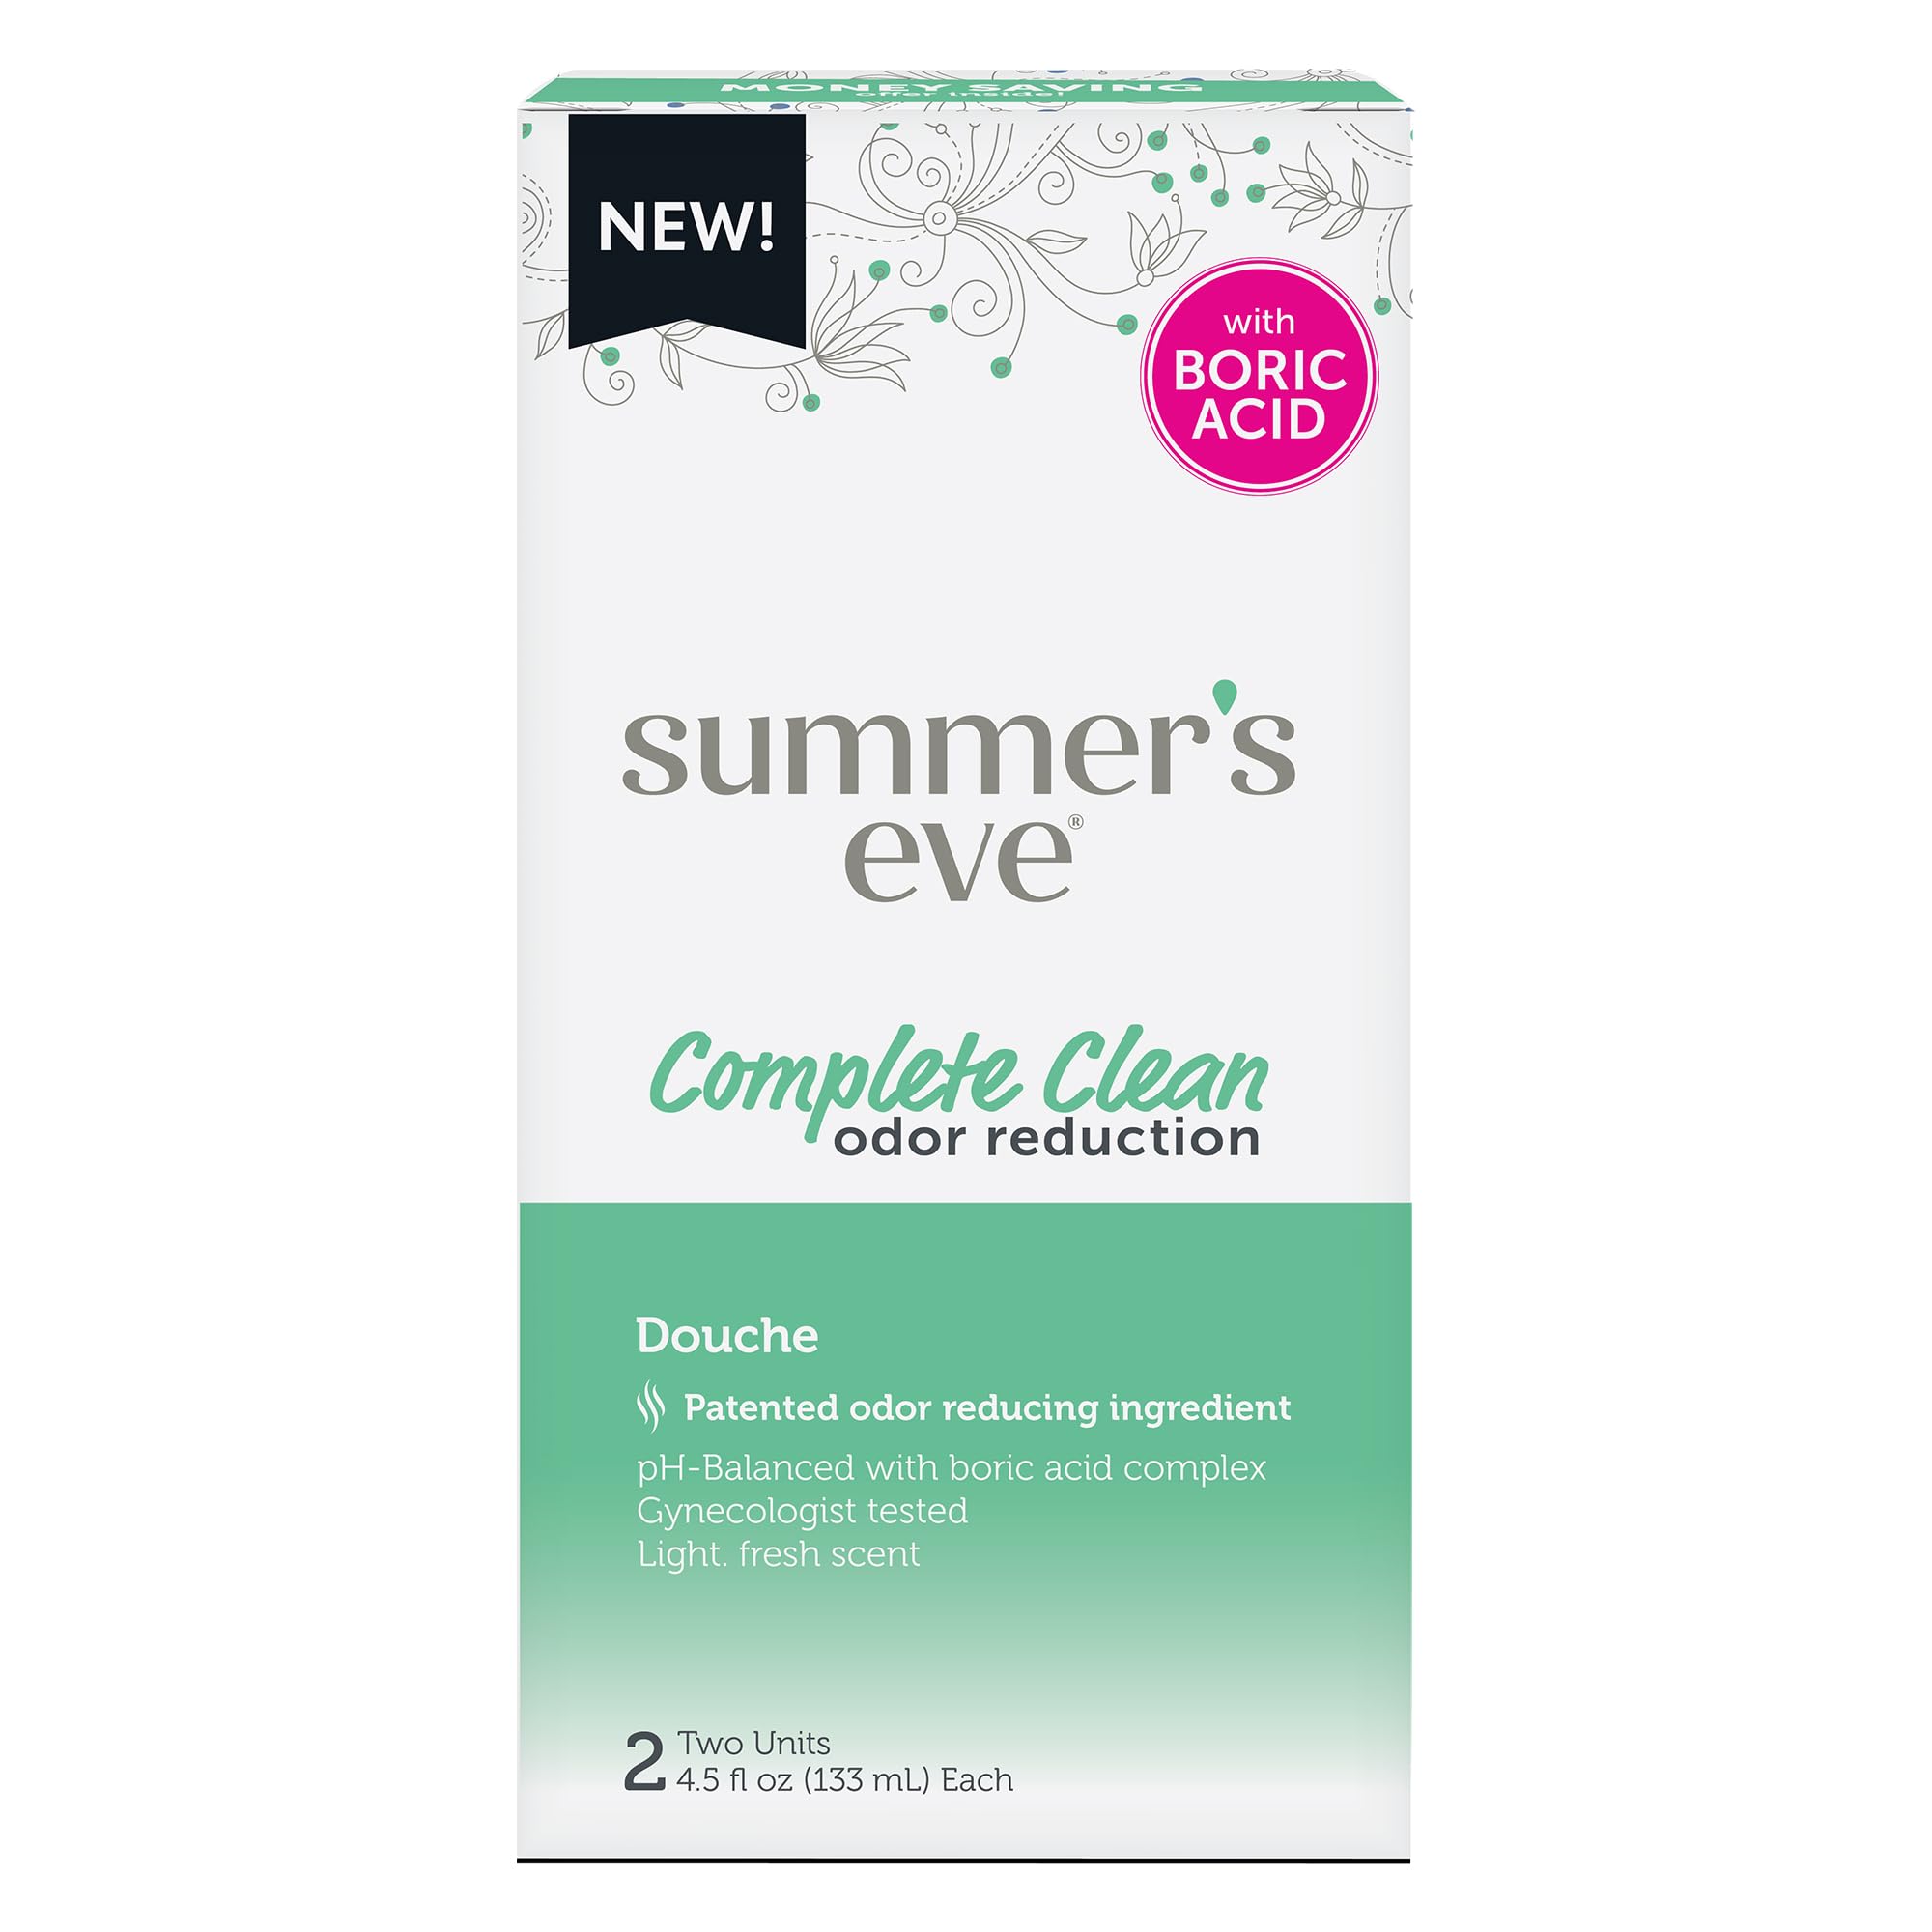 Summer's Eve Feminine Douche, Complete Clean Odor Reduction with Boric Acid Complex, 2 Units, 4.5 oz Each